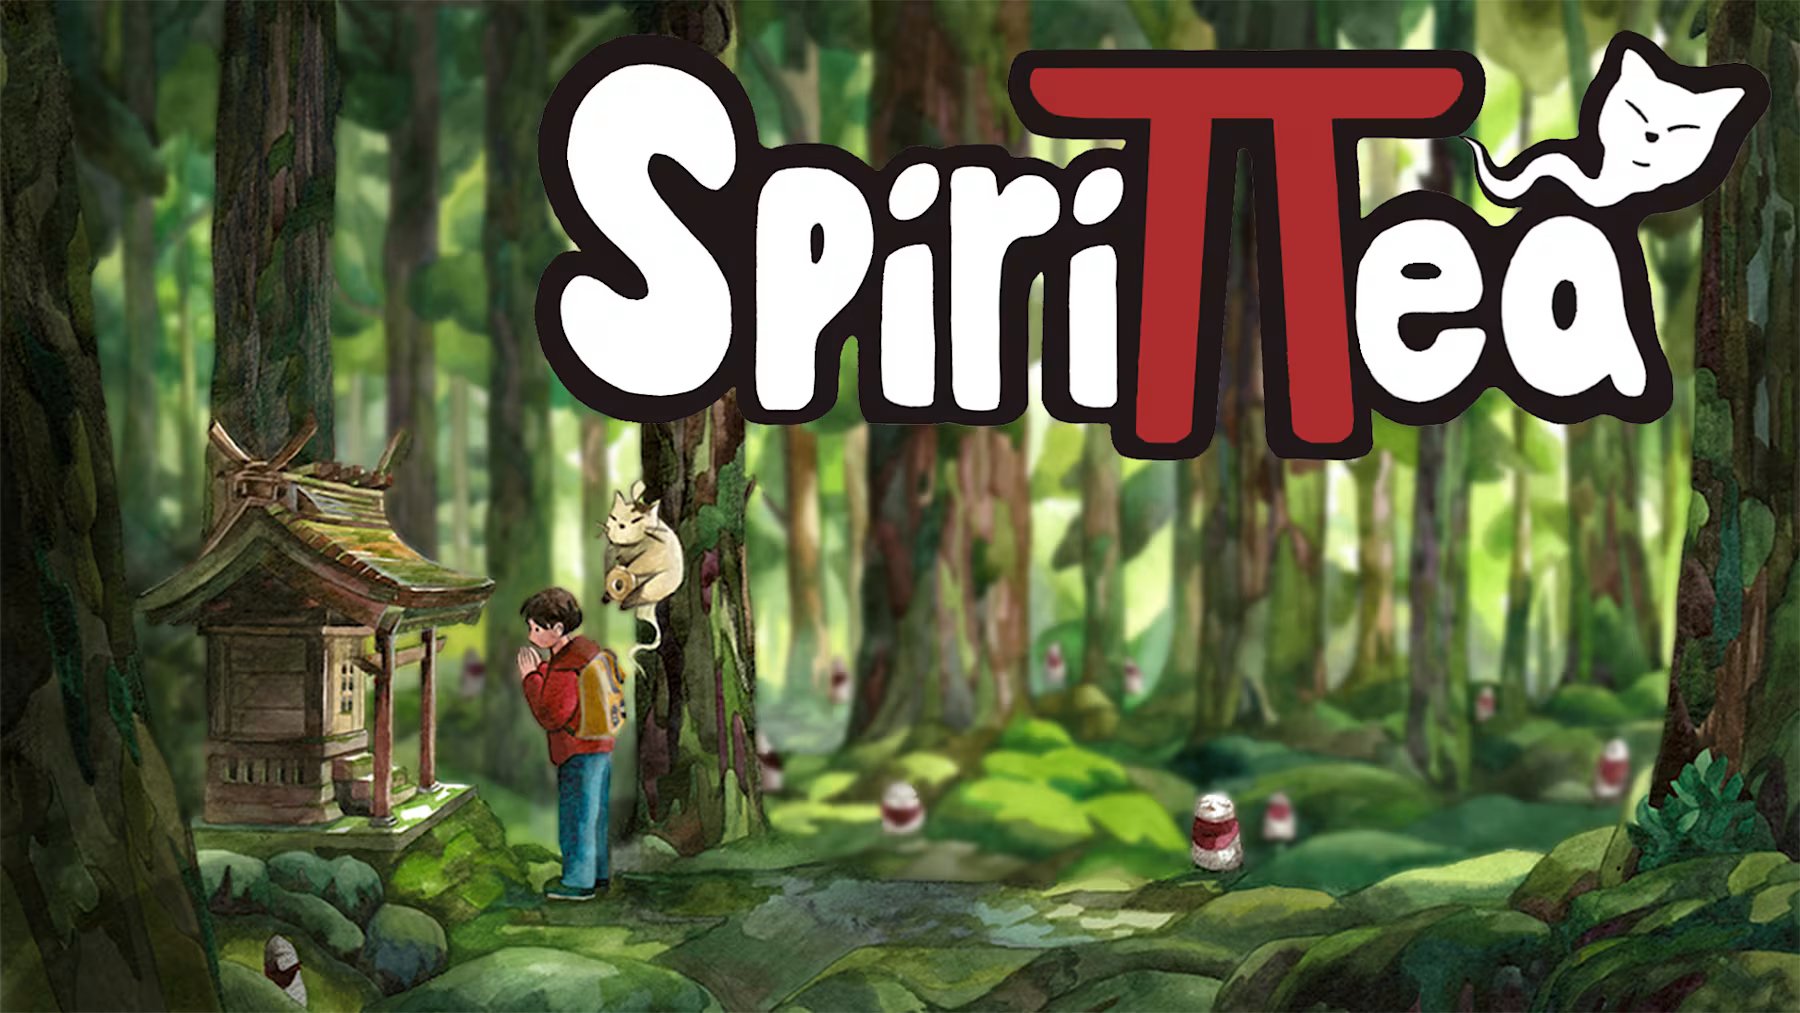 SwitchArcade Round-Up: Reviews Featuring ‘Spirittea’ and ‘Salt & Sacrifice’, Plus the Latest Releases, News, and Sales